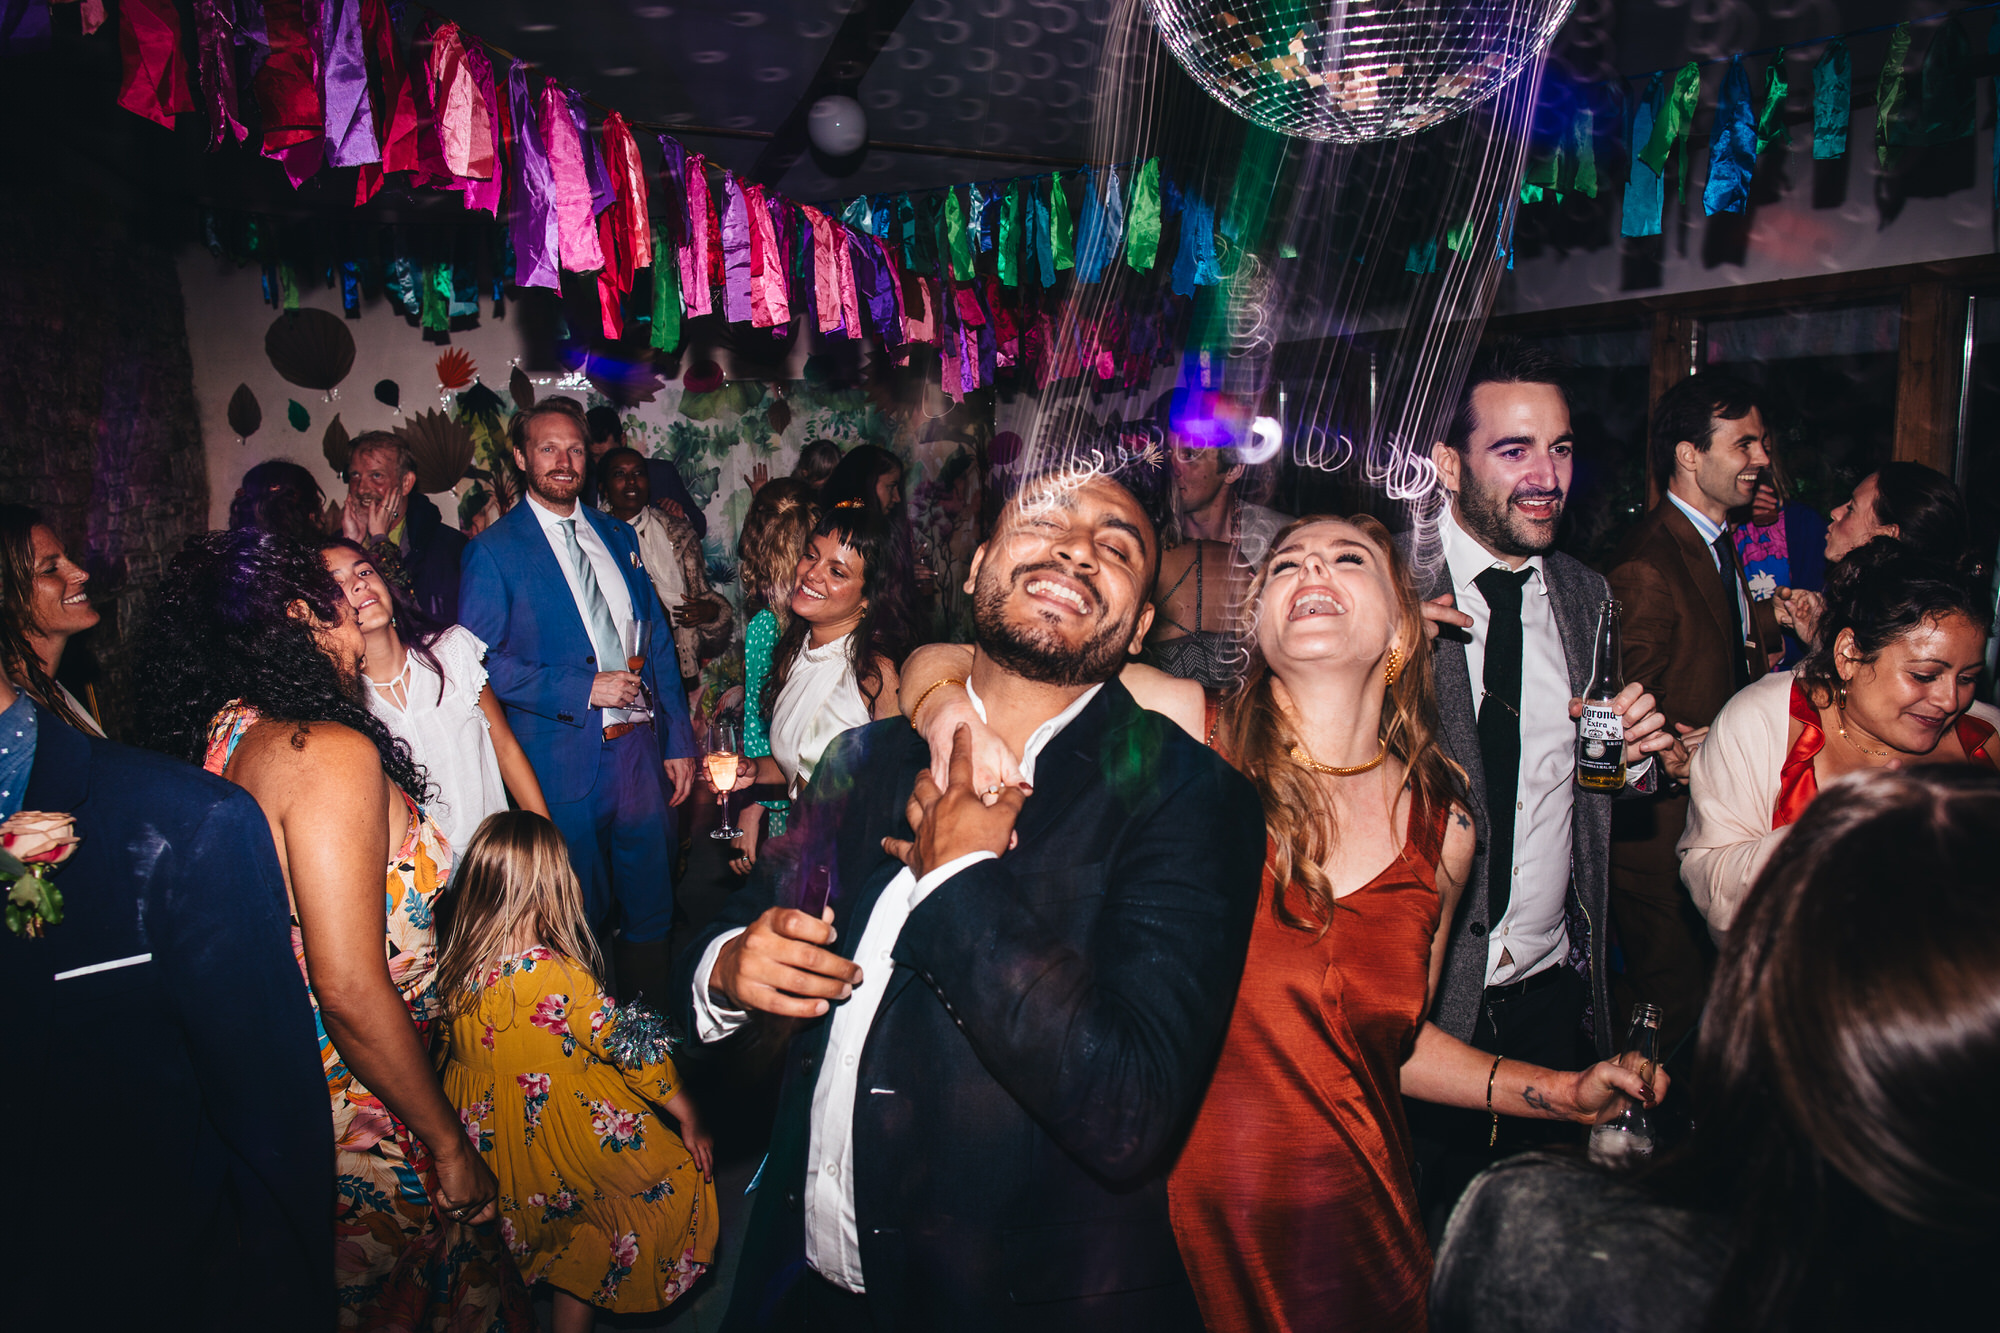 guests singing and dancing on dancefloor with disco ball